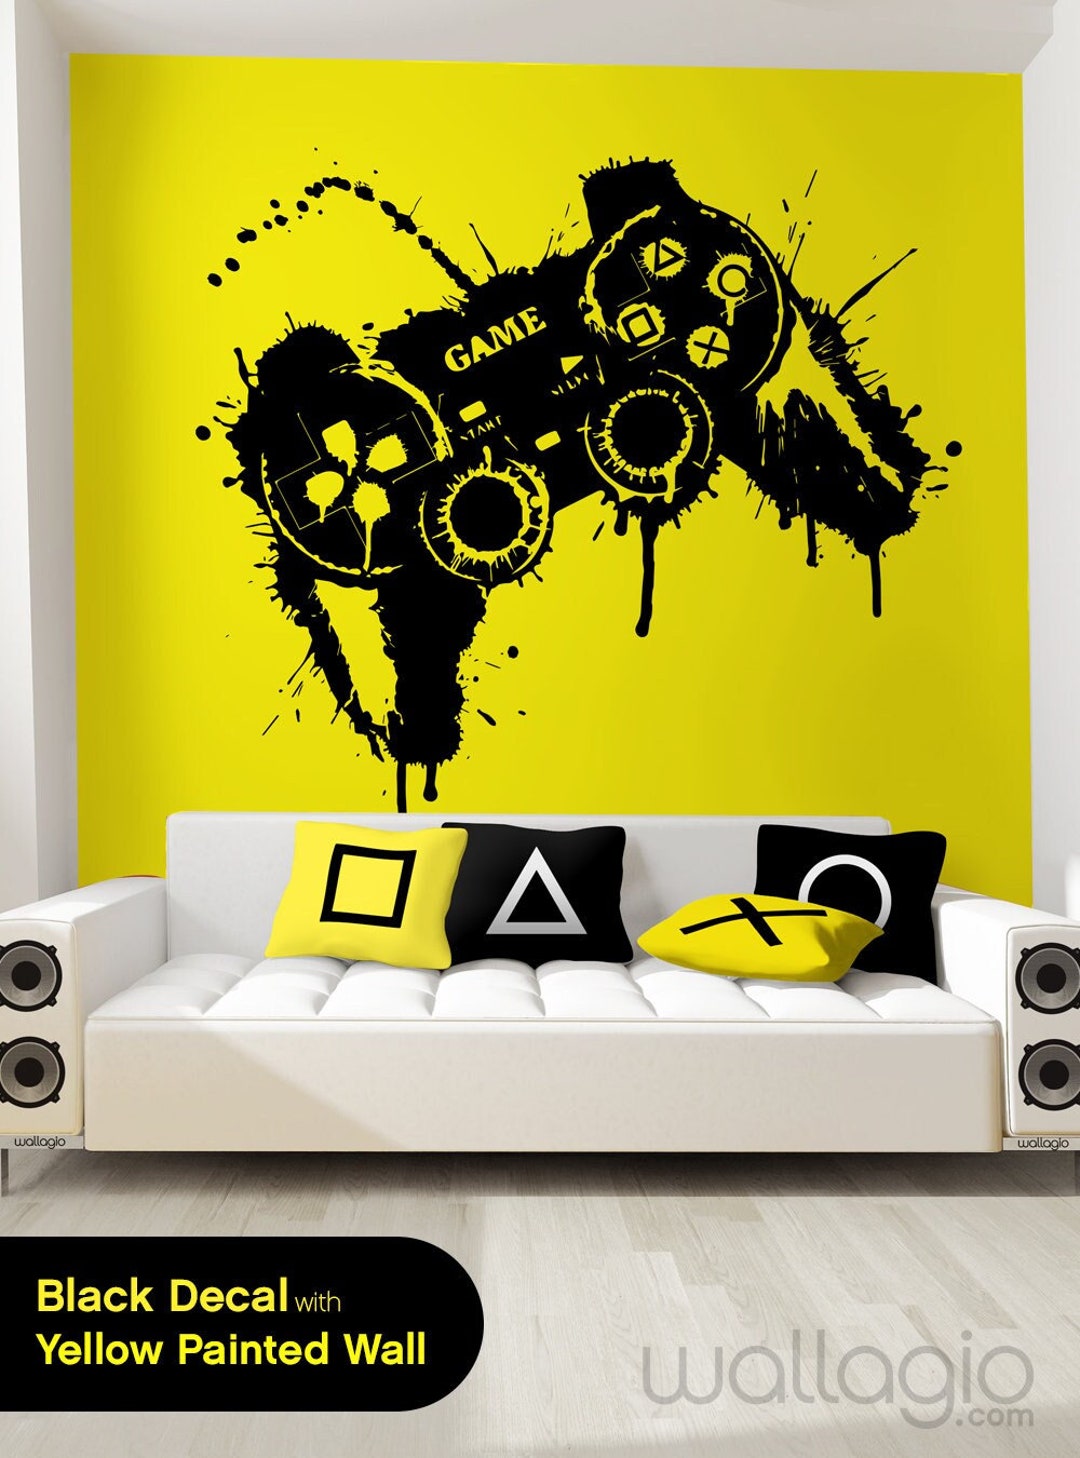 Vinyl Wall Decal Gaming Quote Teen Room Video Game Stickers Mural